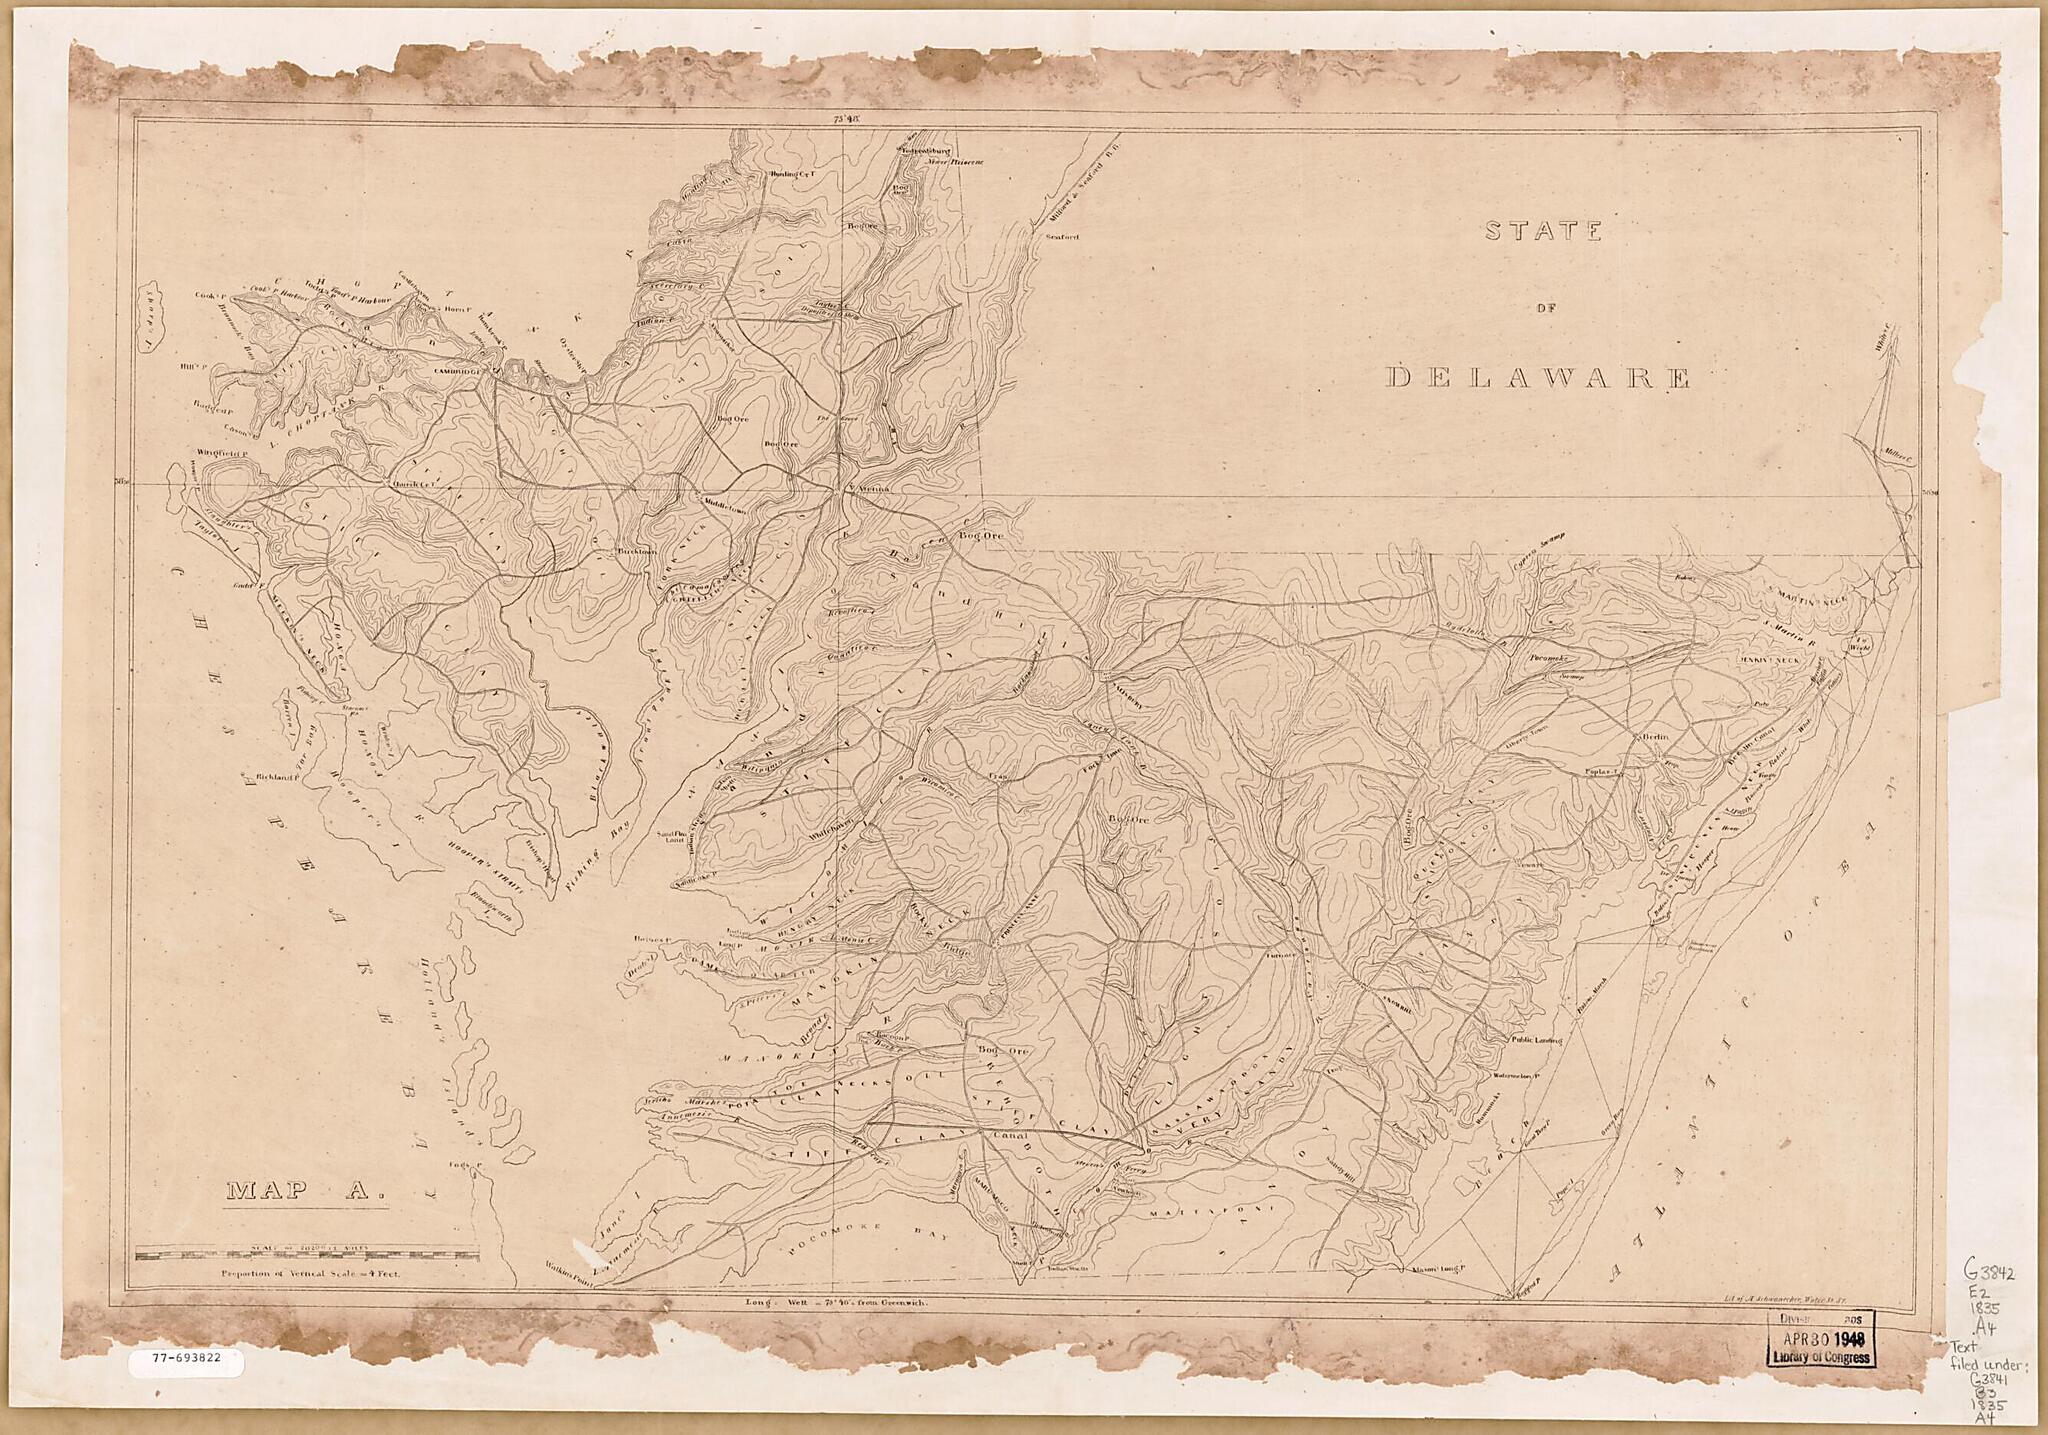 This old map of Map A from 1835 was created by J. H. (John Henry) [Alexander, A. Schwanecker in 1835